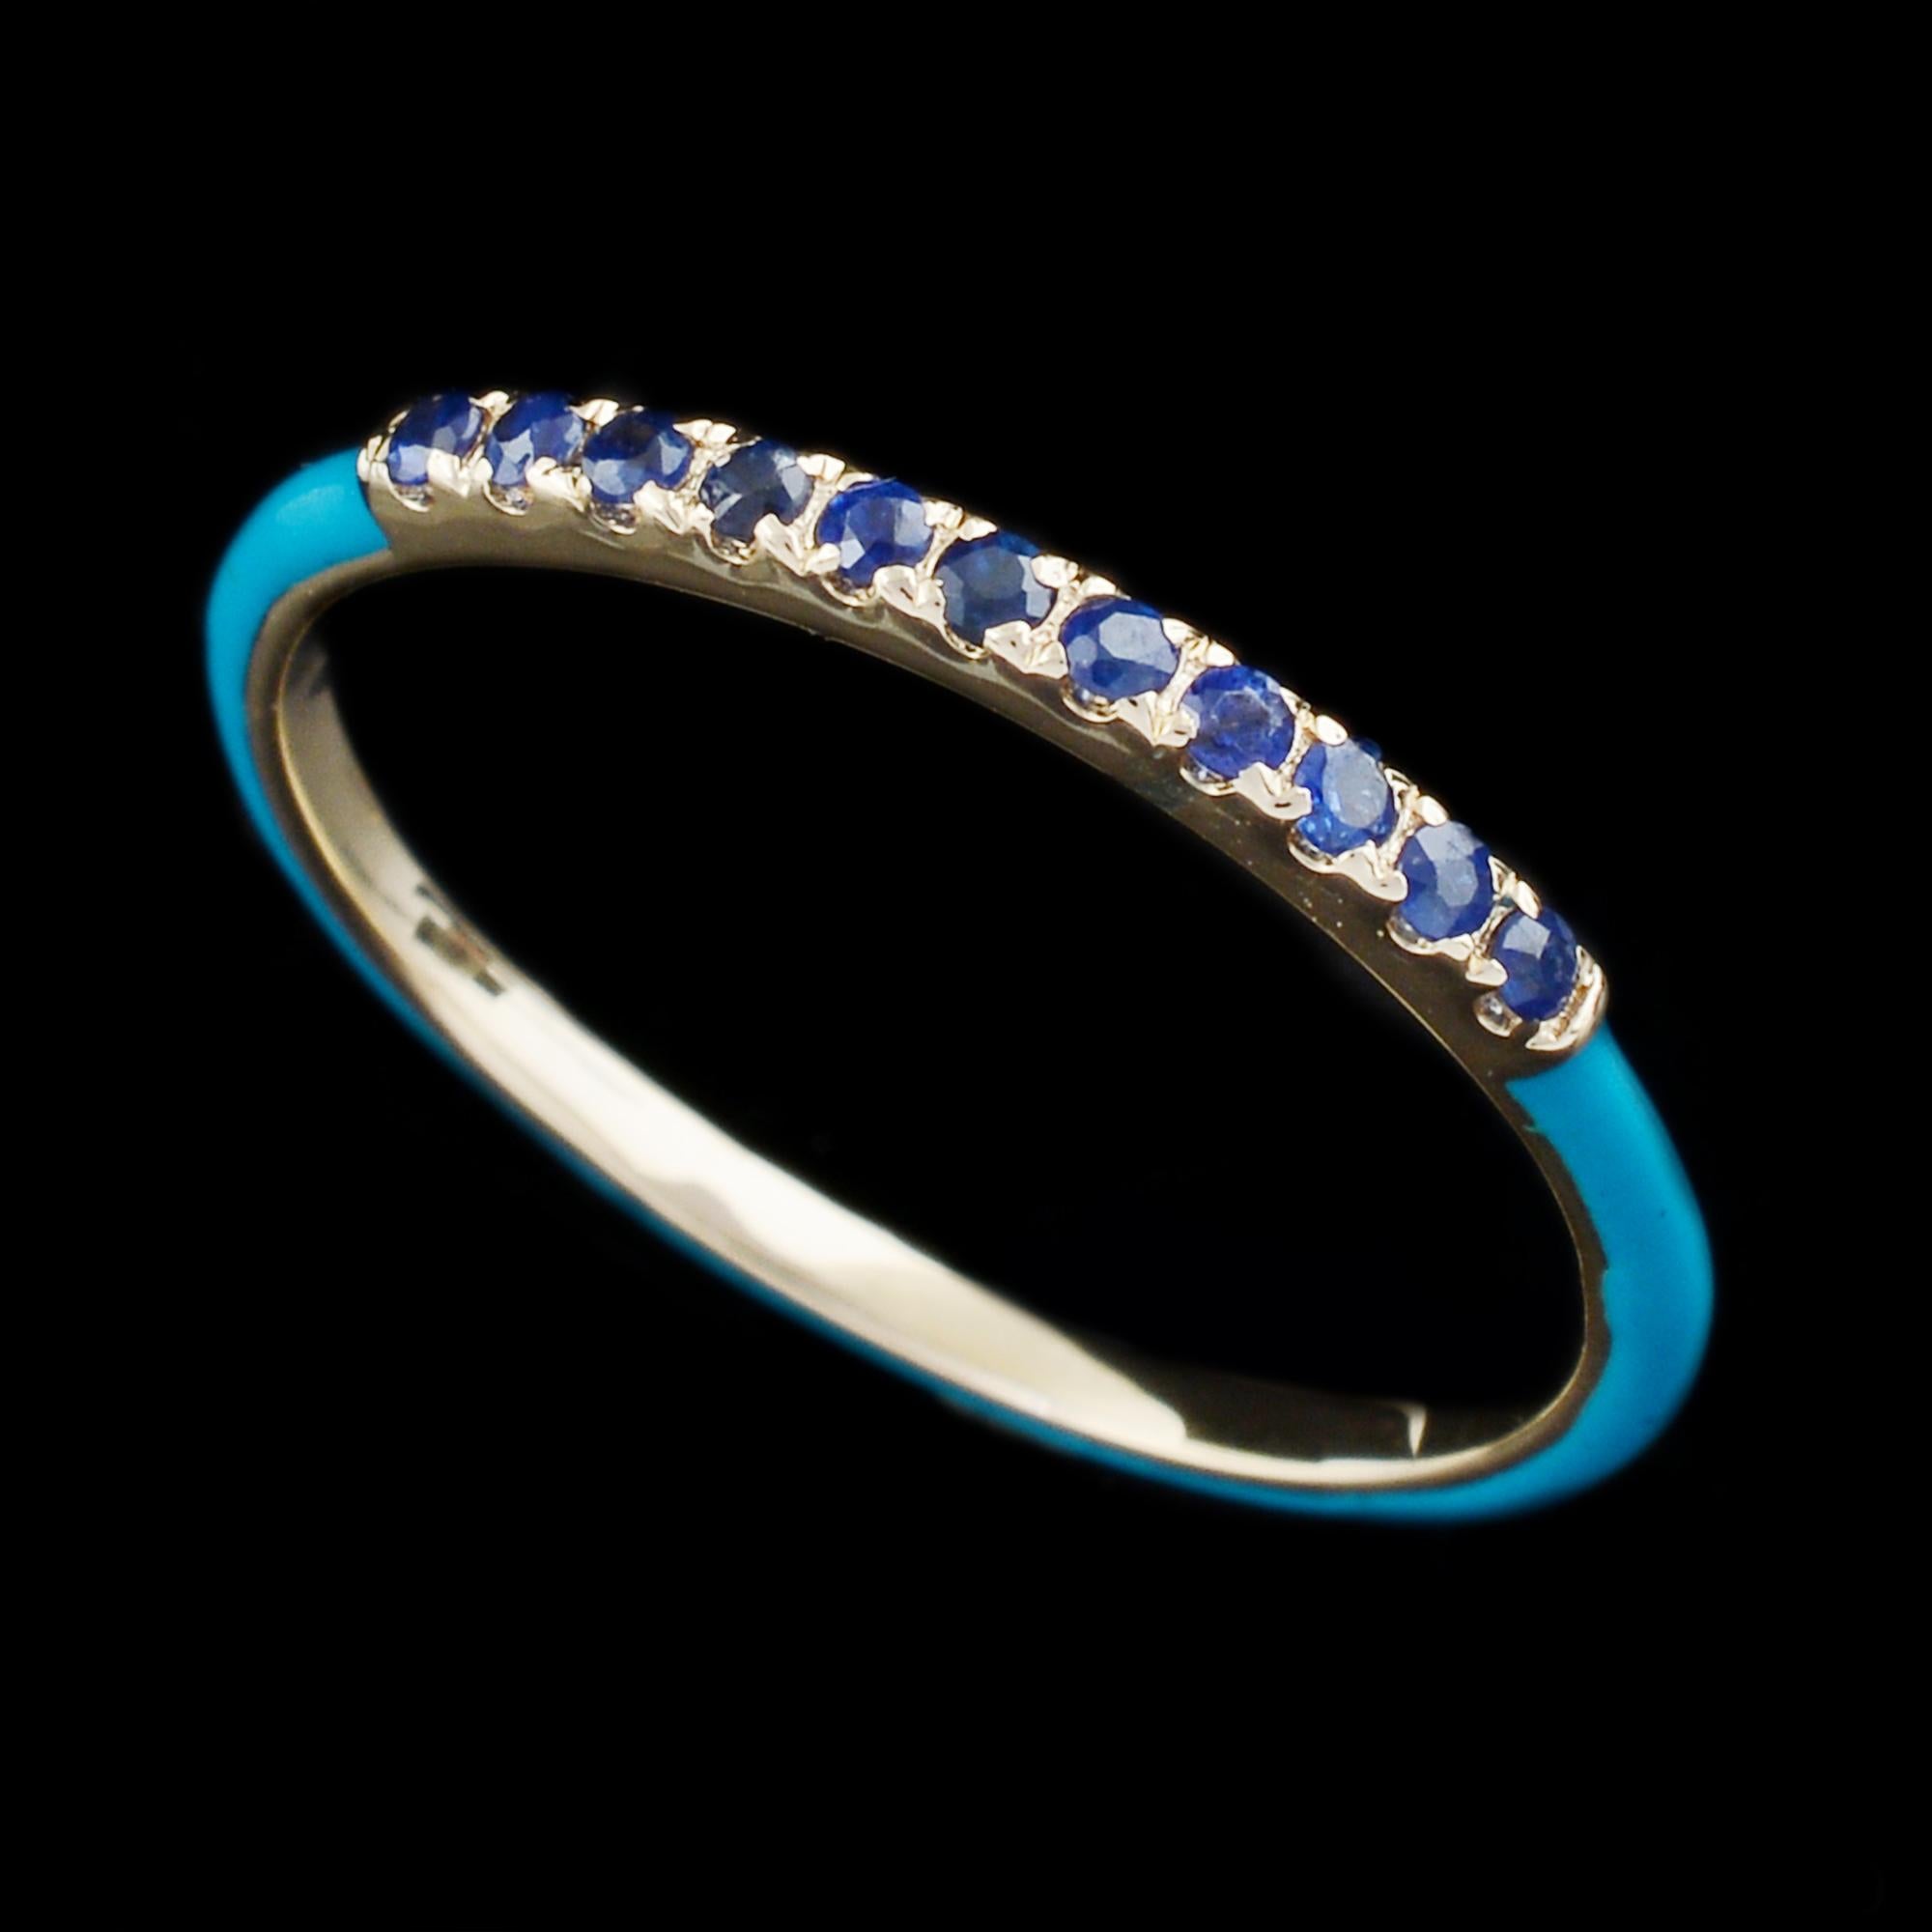 Real Blue Sapphire Gemstone Blue Enamel Half Eternity Band Ring 14Kt Yellow Gold For Sale 2